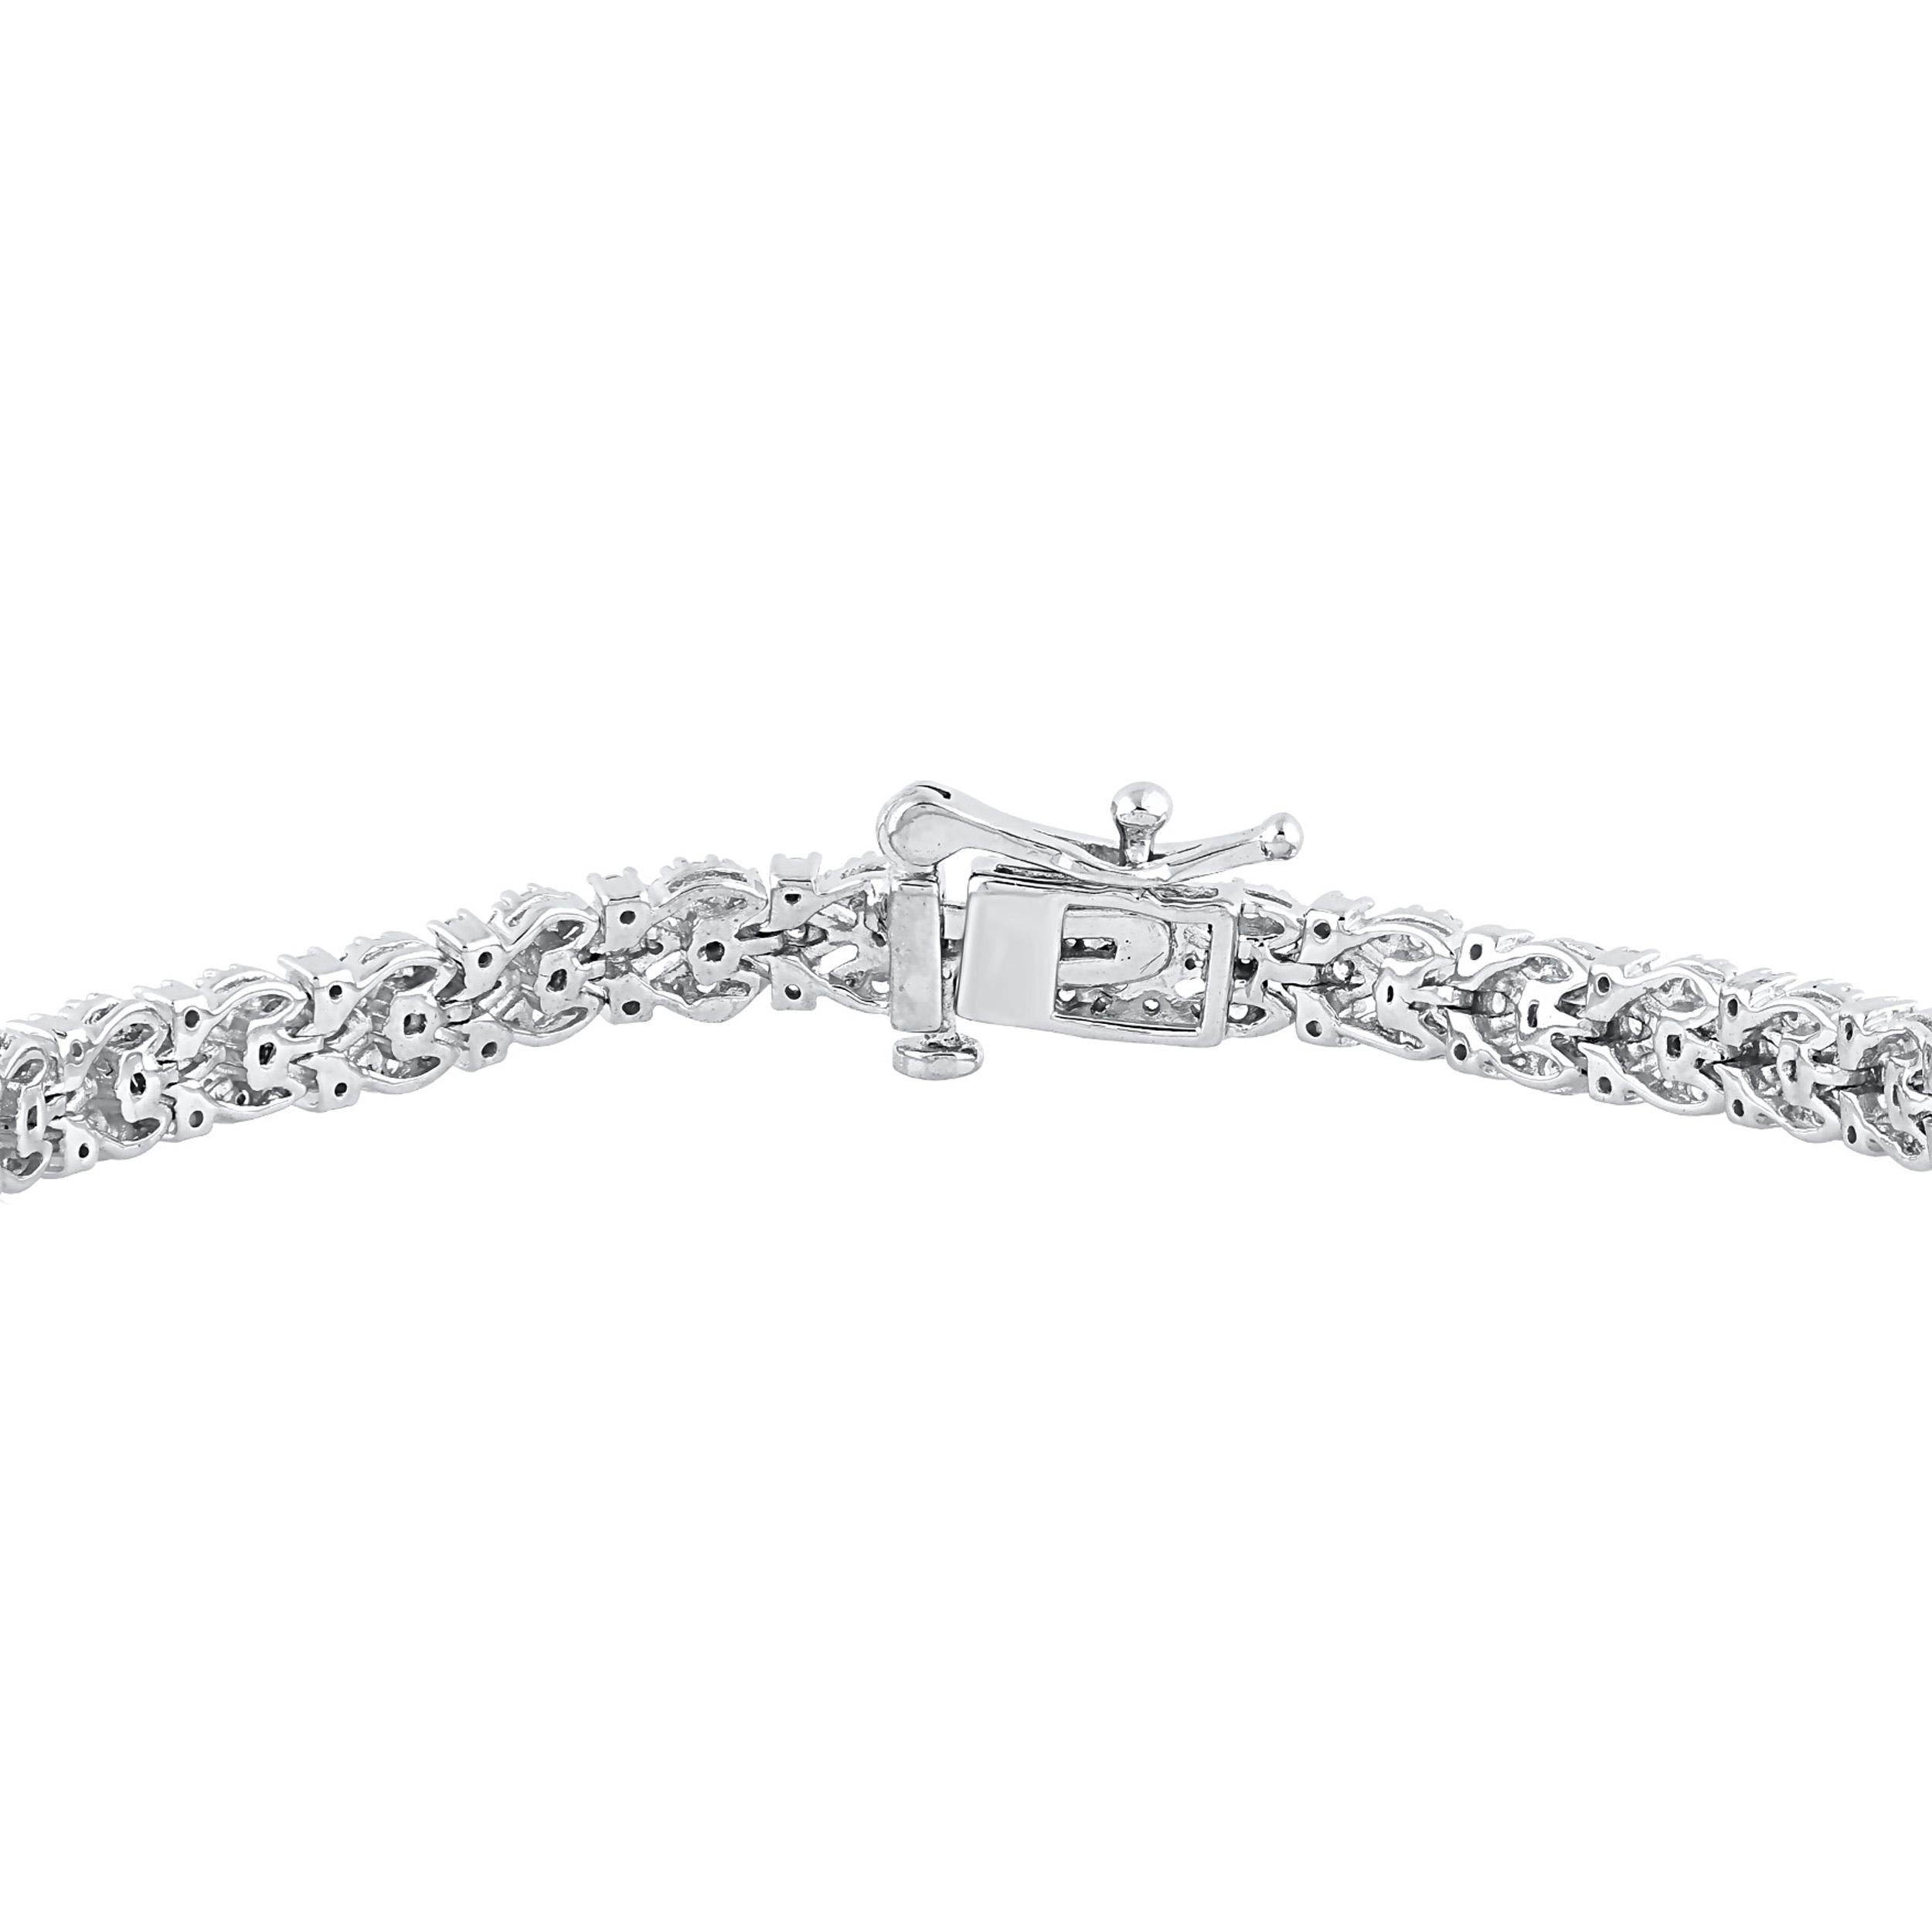 A graceful addition to her wardrobe, this diamond bracelet brings the perfect touch of sparkle to her look. Beautifully hand-crafted by our inhouse experts in 14 karat white gold and embedded with 432 round brilliant and single cut diamond in prong